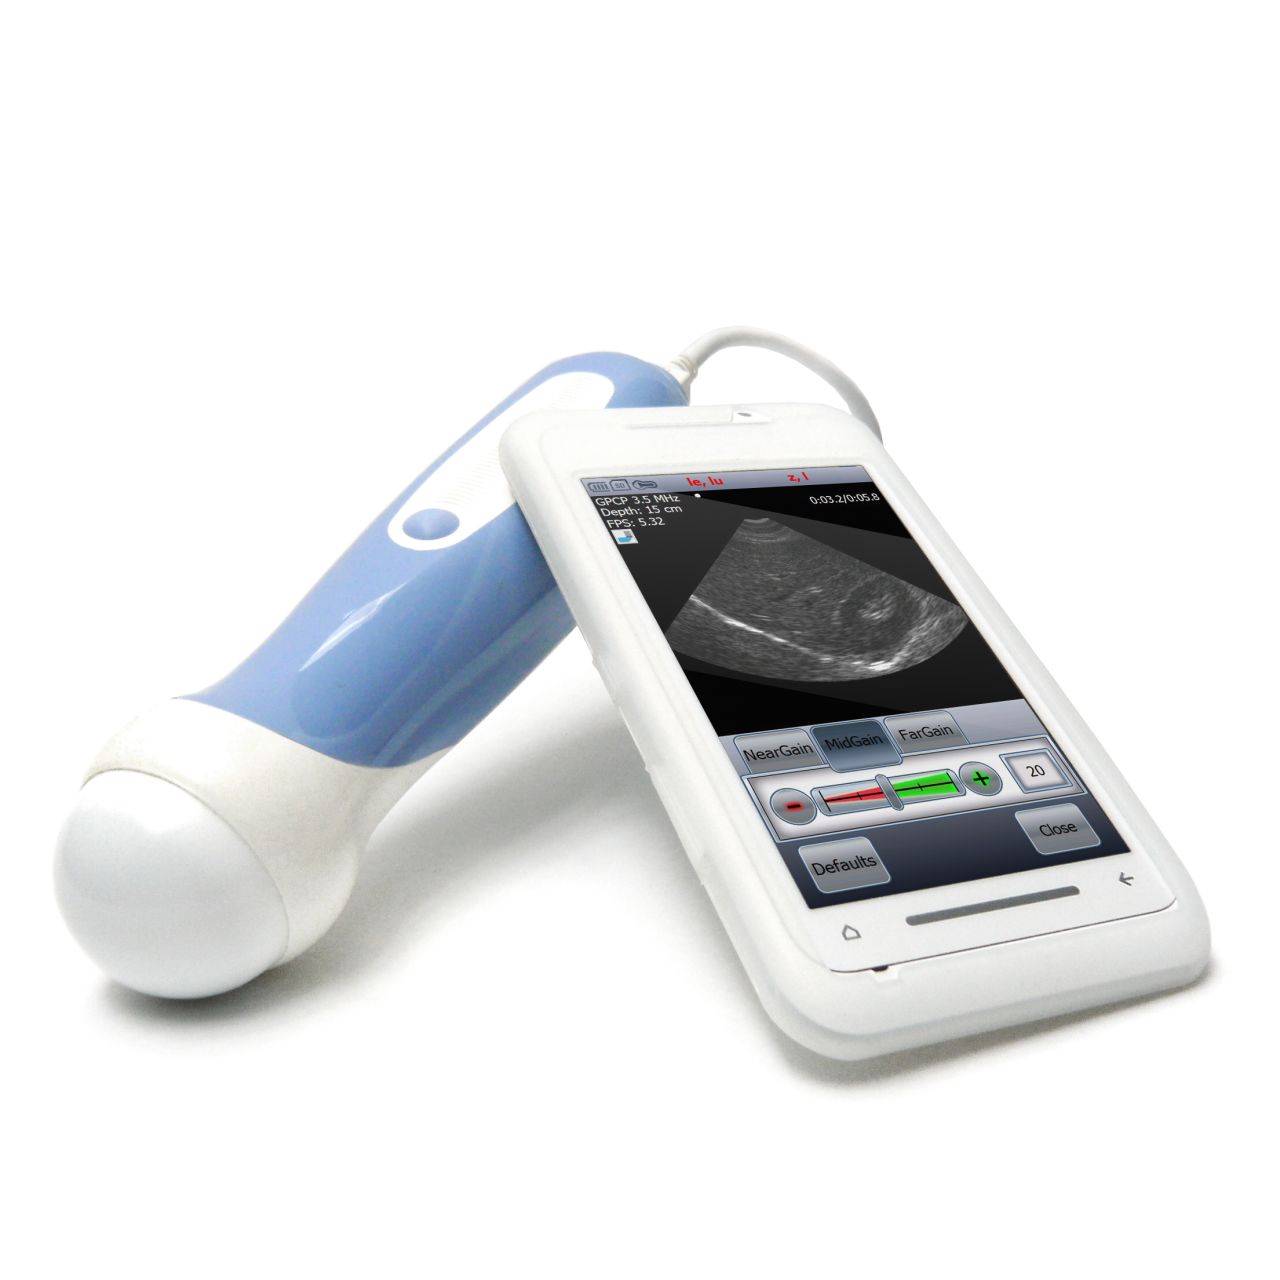 The Mobisante MobiUS SP1 smartphone ultrasound system has the potential to bring ultrasound technology to remote rural areas.